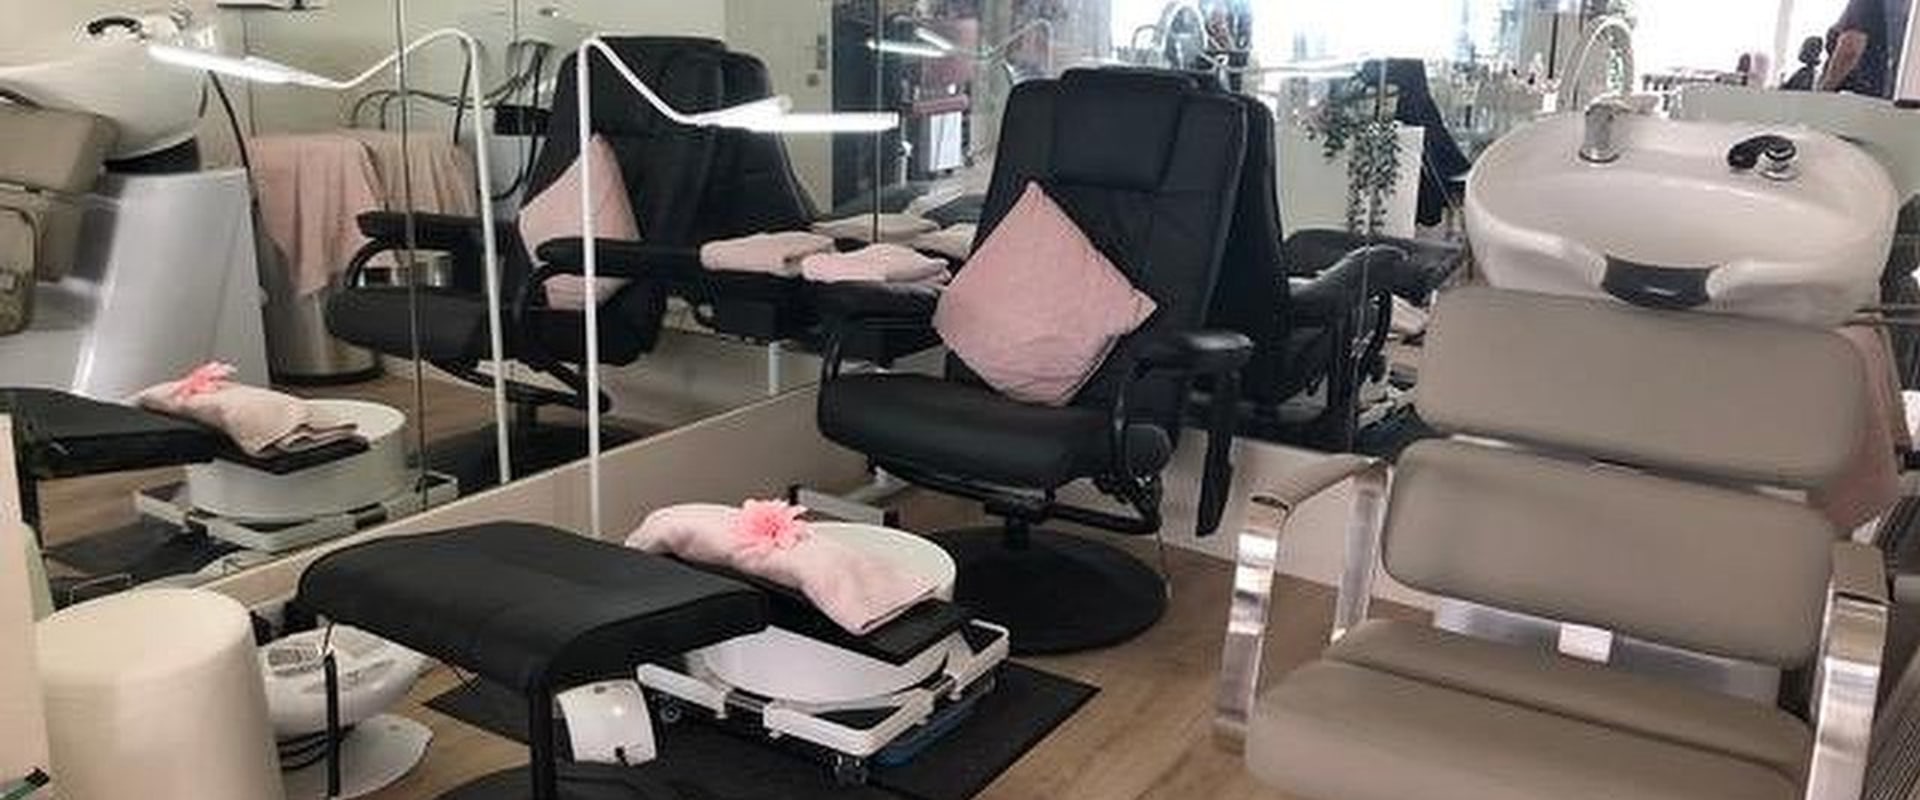 Discover the Best Beauty Salons in London That Accept Gift Vouchers and Loyalty Cards